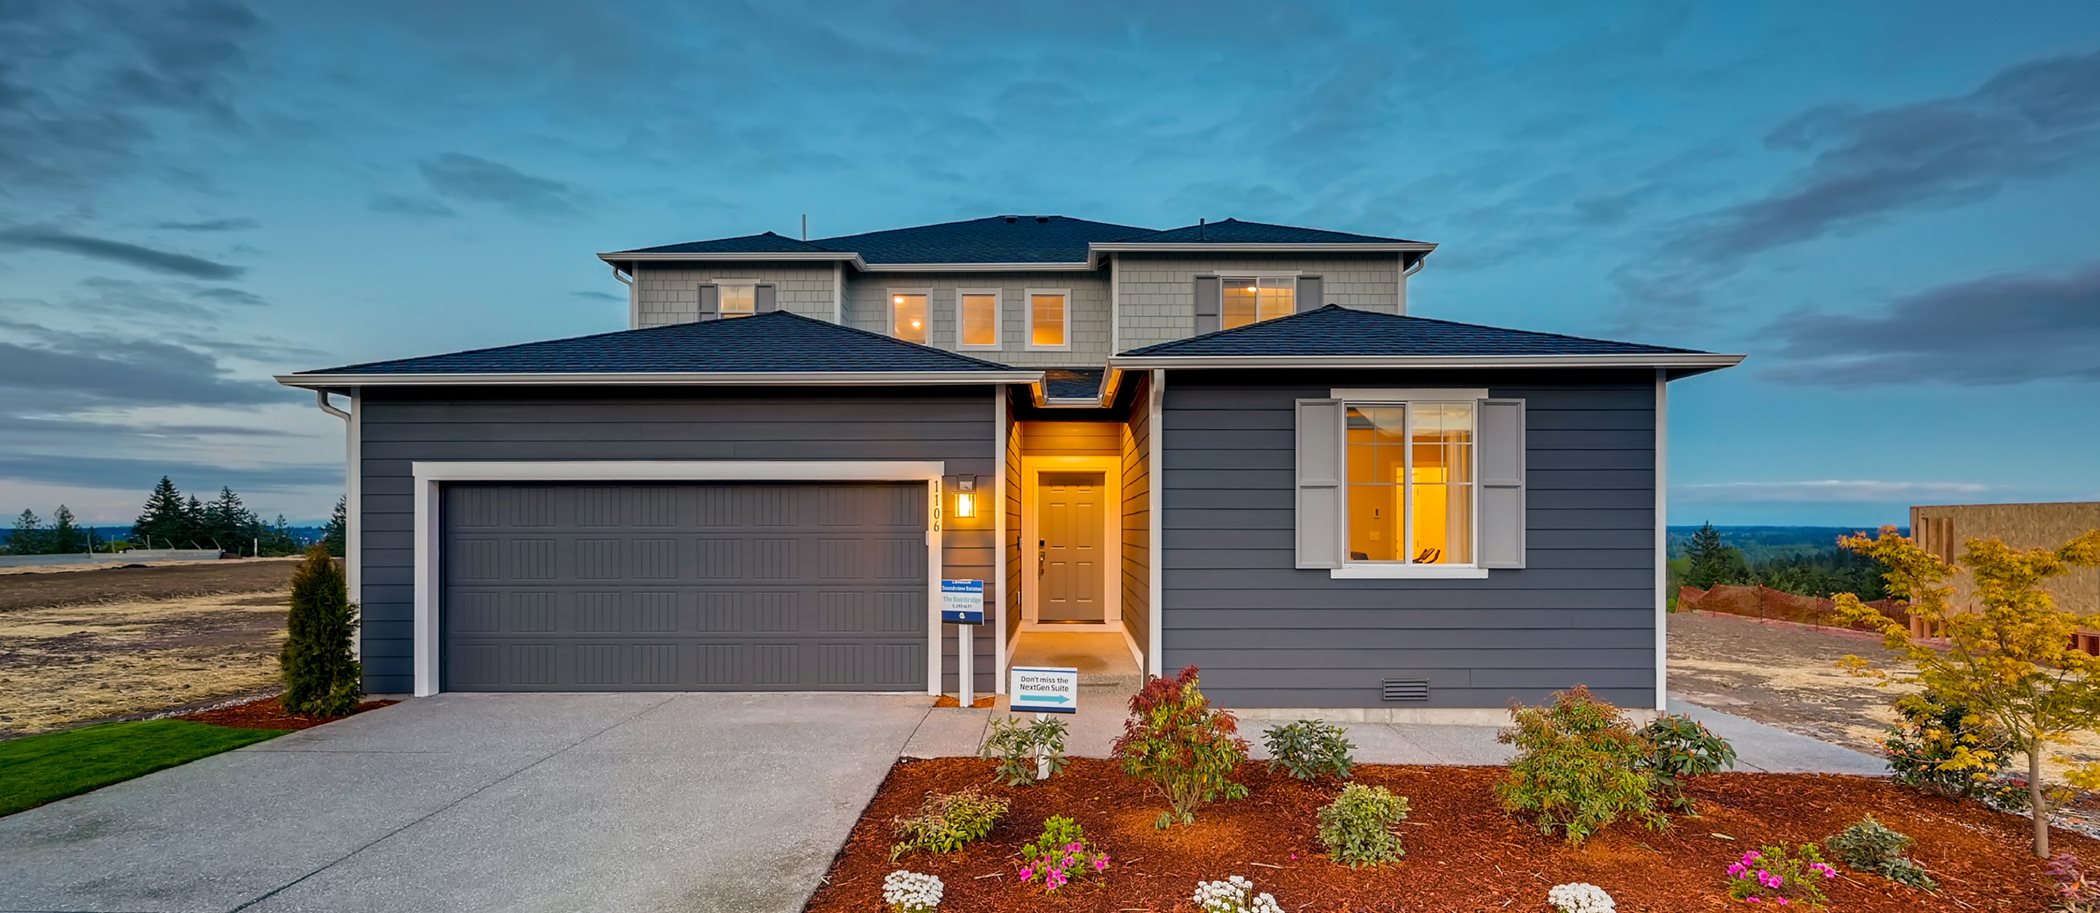 Beautiful new home in a grey color scheme captured at twilight 